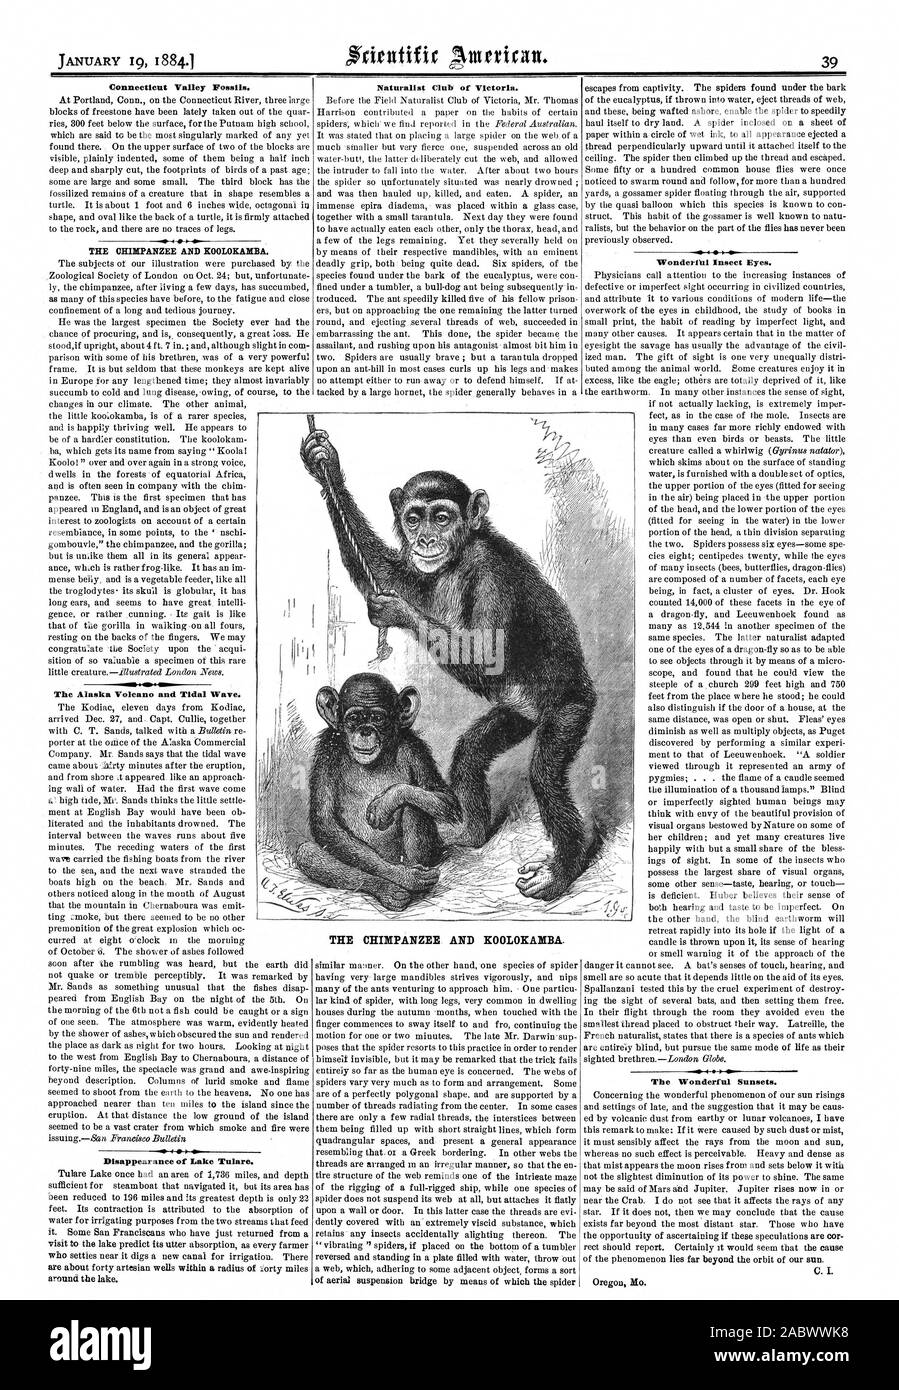 Connecticut Valley Fossils. THE CHIMPANZEE AND KOOLOKAMBA. The Alaska Volcano and Tidal Wave. Disappearance of Lake Tulare. Naturalist Club of Victoria. THE CHIMPANZEE AND KOOLOKABIBA. Wonderful Insect Eyes. 4 0  The Wonderful Sunsets., scientific american, 1884-01-19 Stock Photo